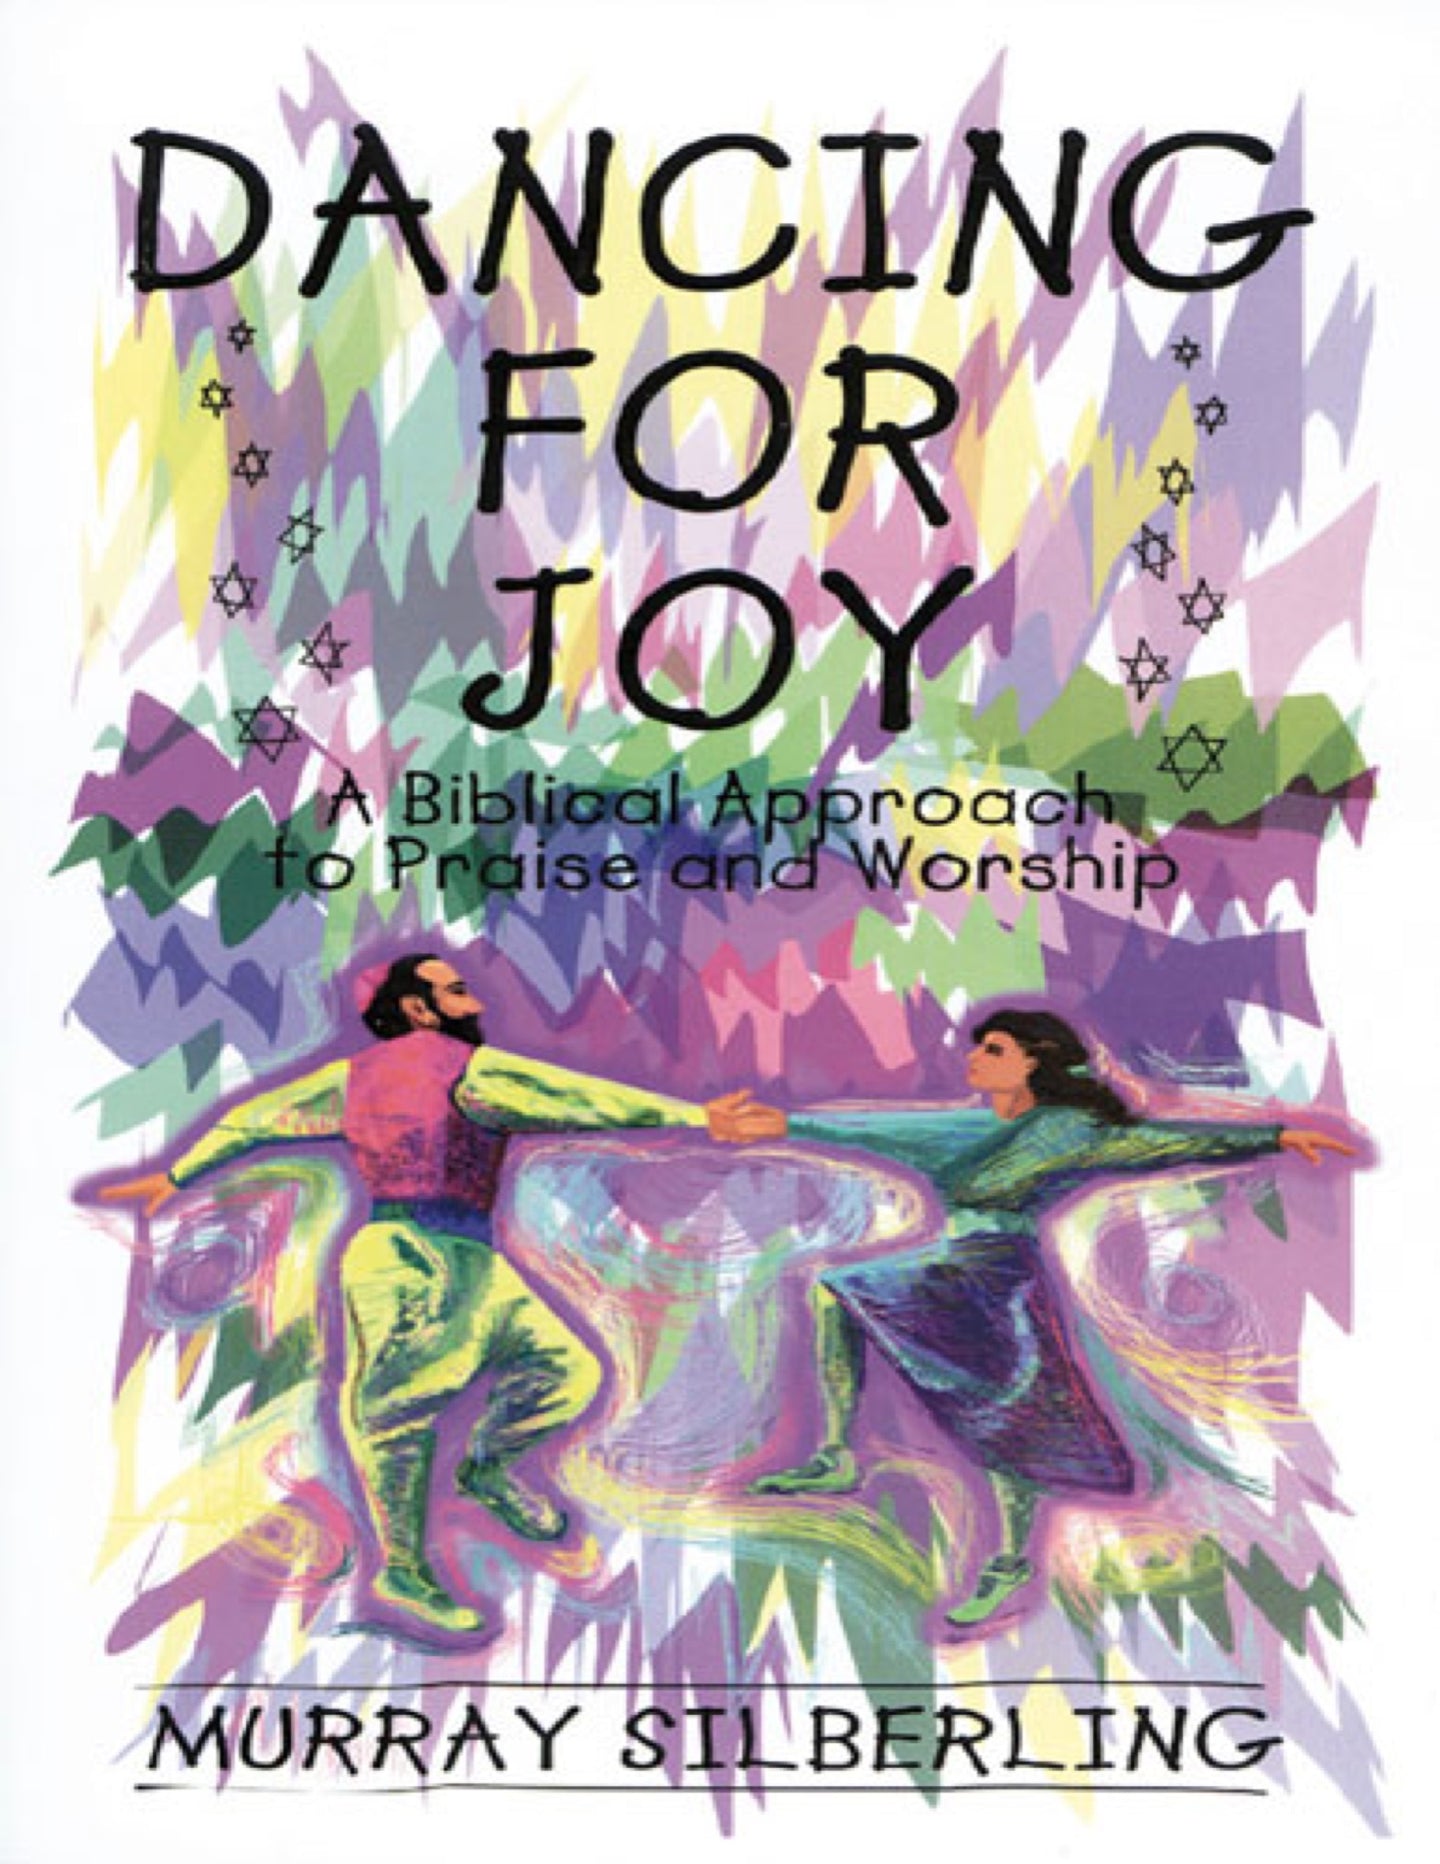 Dancing For Joy: A Biblical Approach to Praise & Worship by Murray Silberling